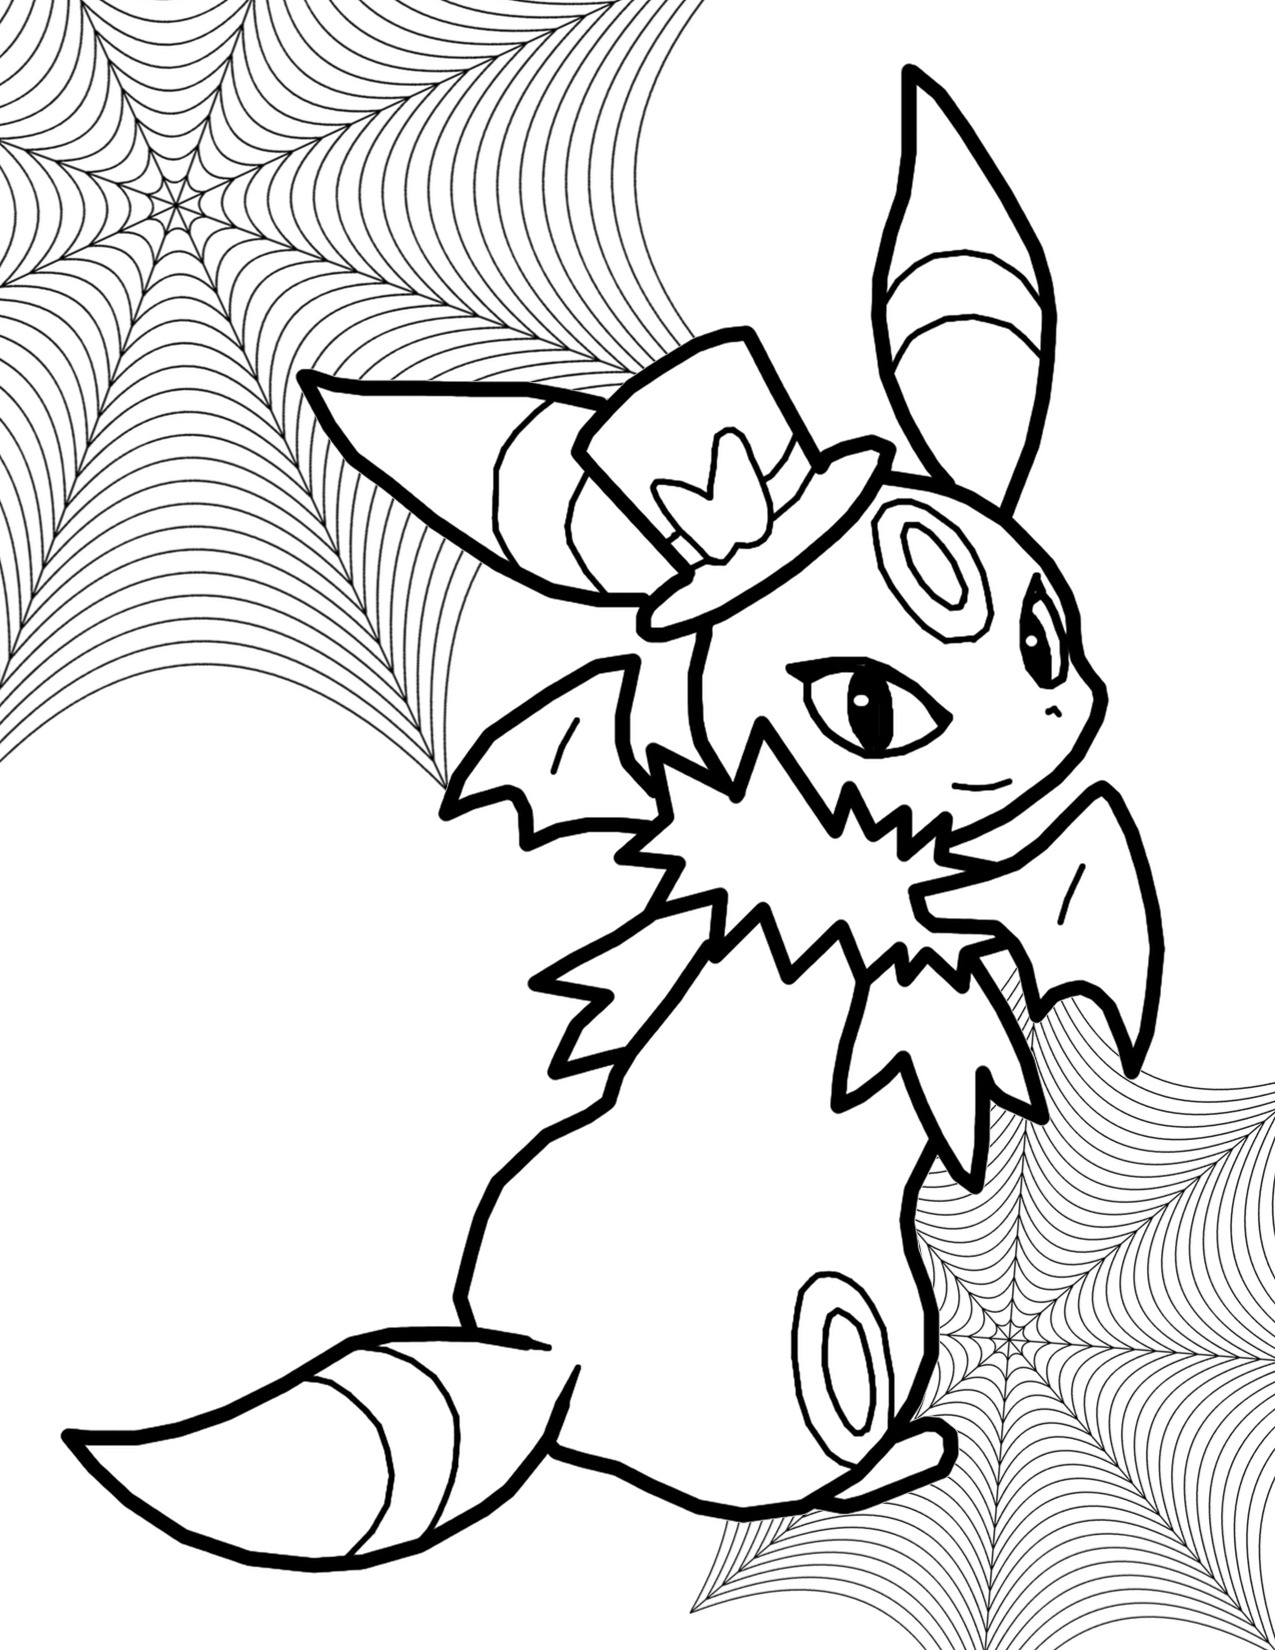 ColorMon • Here is the last of the Halloween coloring pages I...